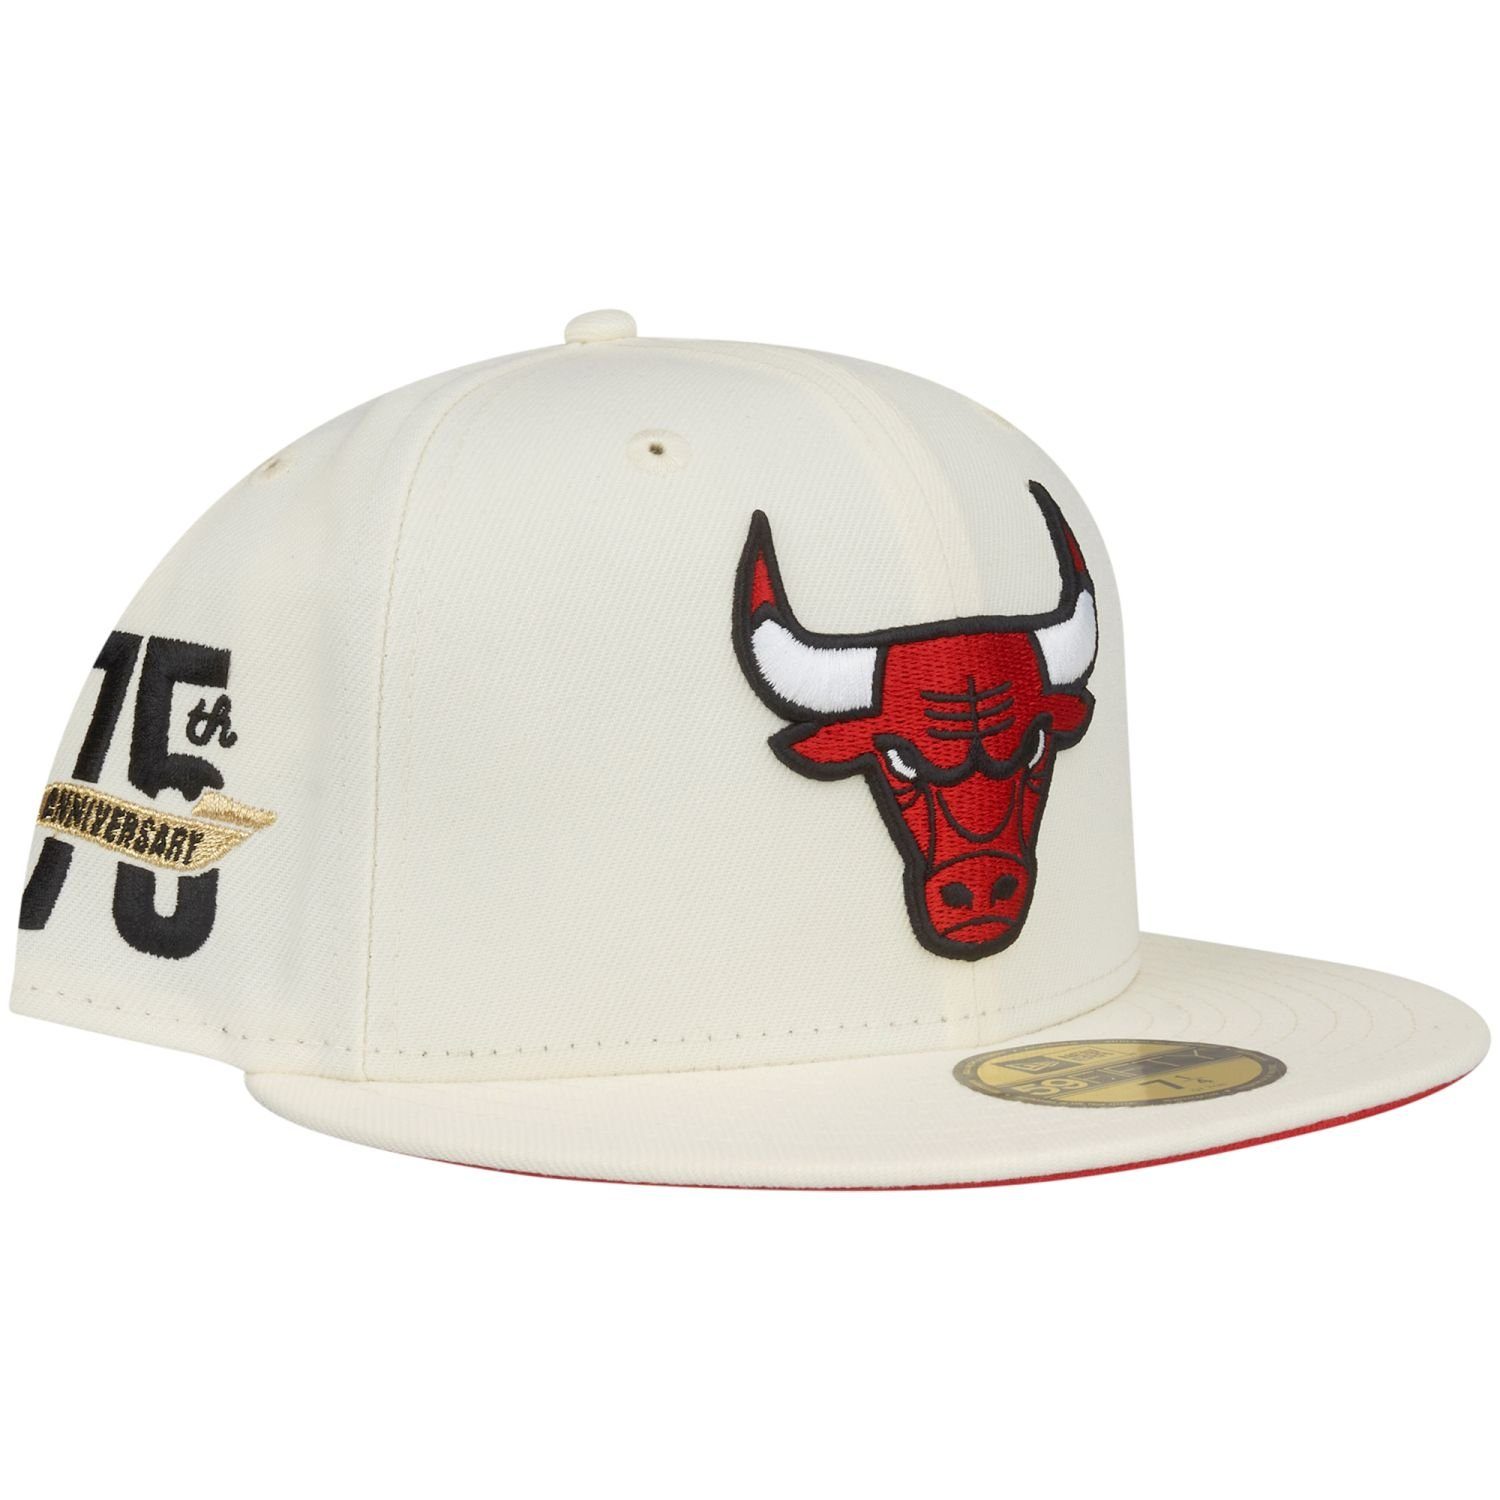 New Era Fitted Cap 59Fifty ANNIVERSARY Chicago Bulls